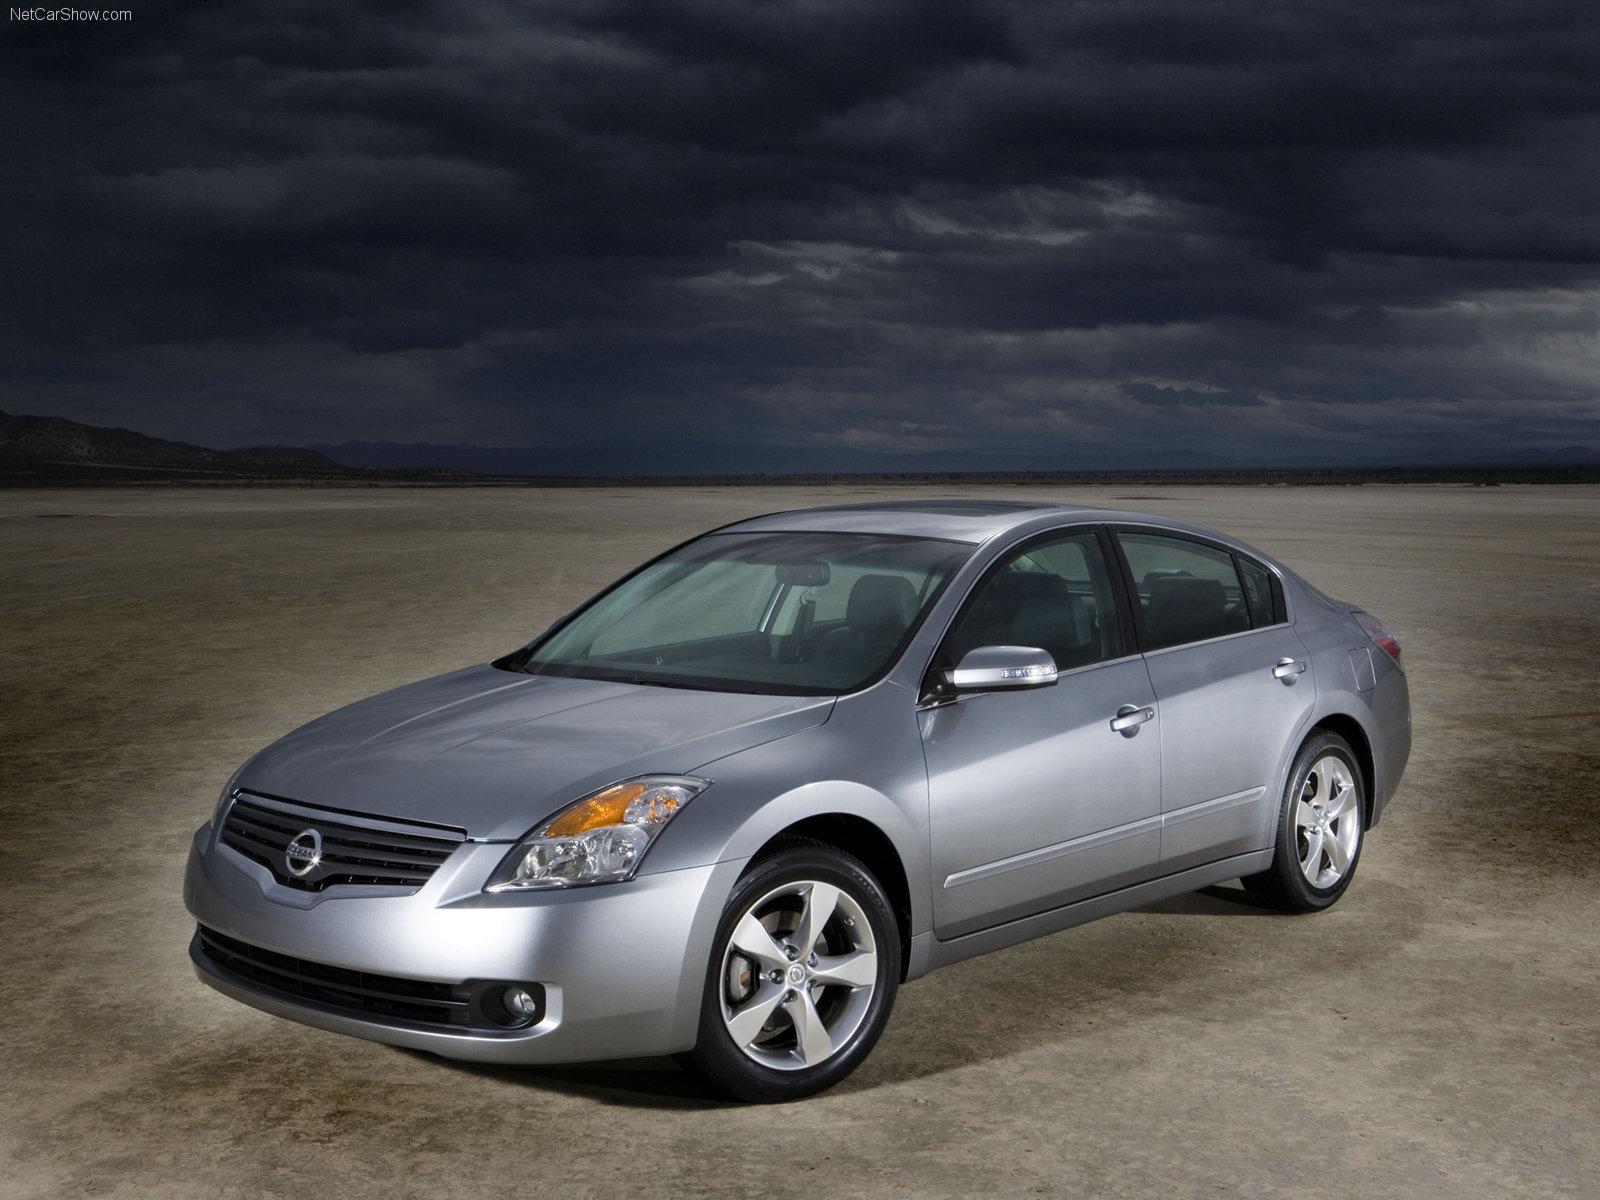 Nissan Altima picture. Nissan photo gallery